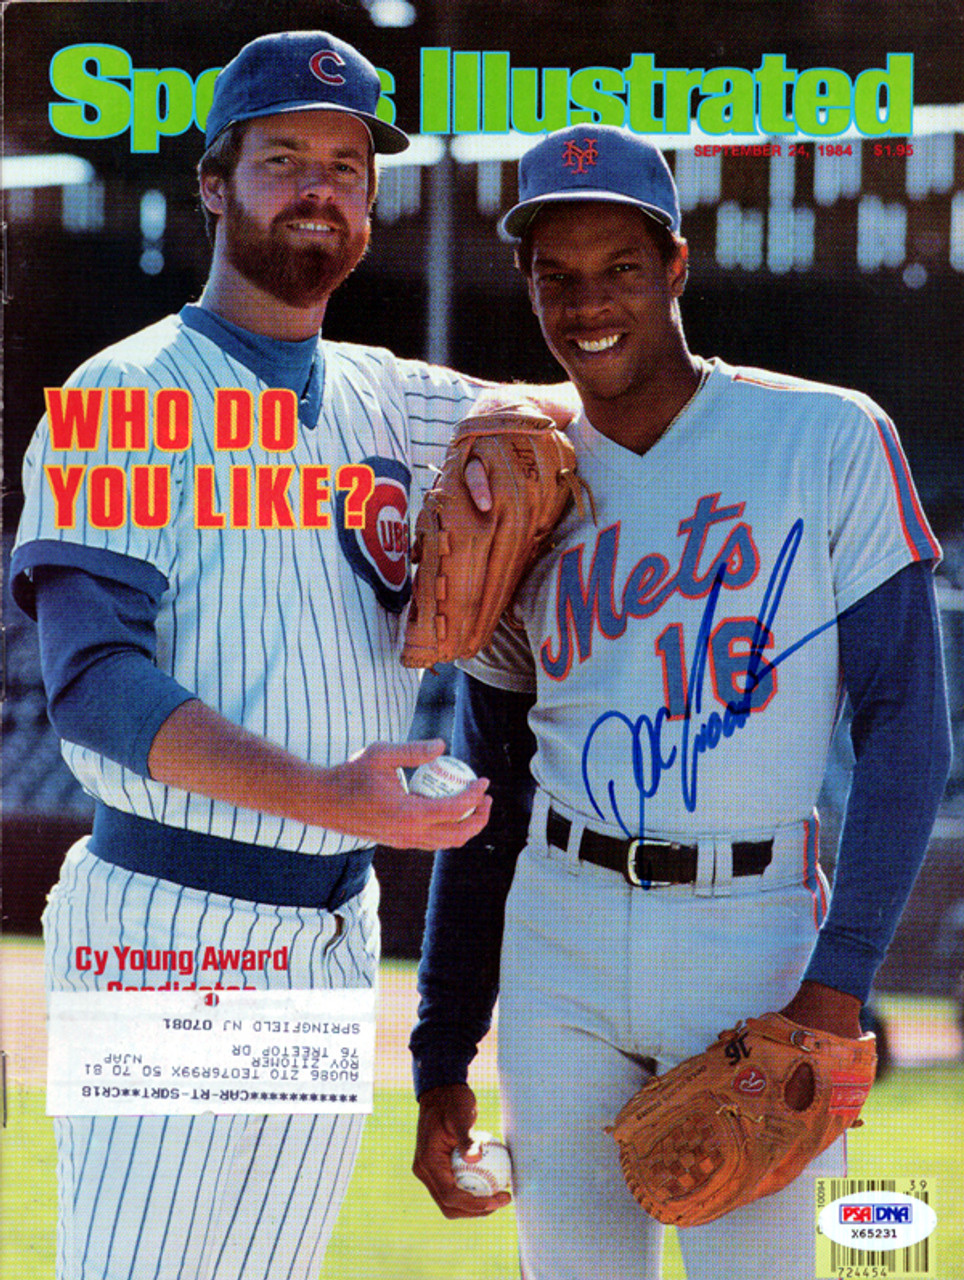 Dwight Doc Gooden Autographed Sports Illustrated Magazine New York Mets  PSA/DNA #X65231